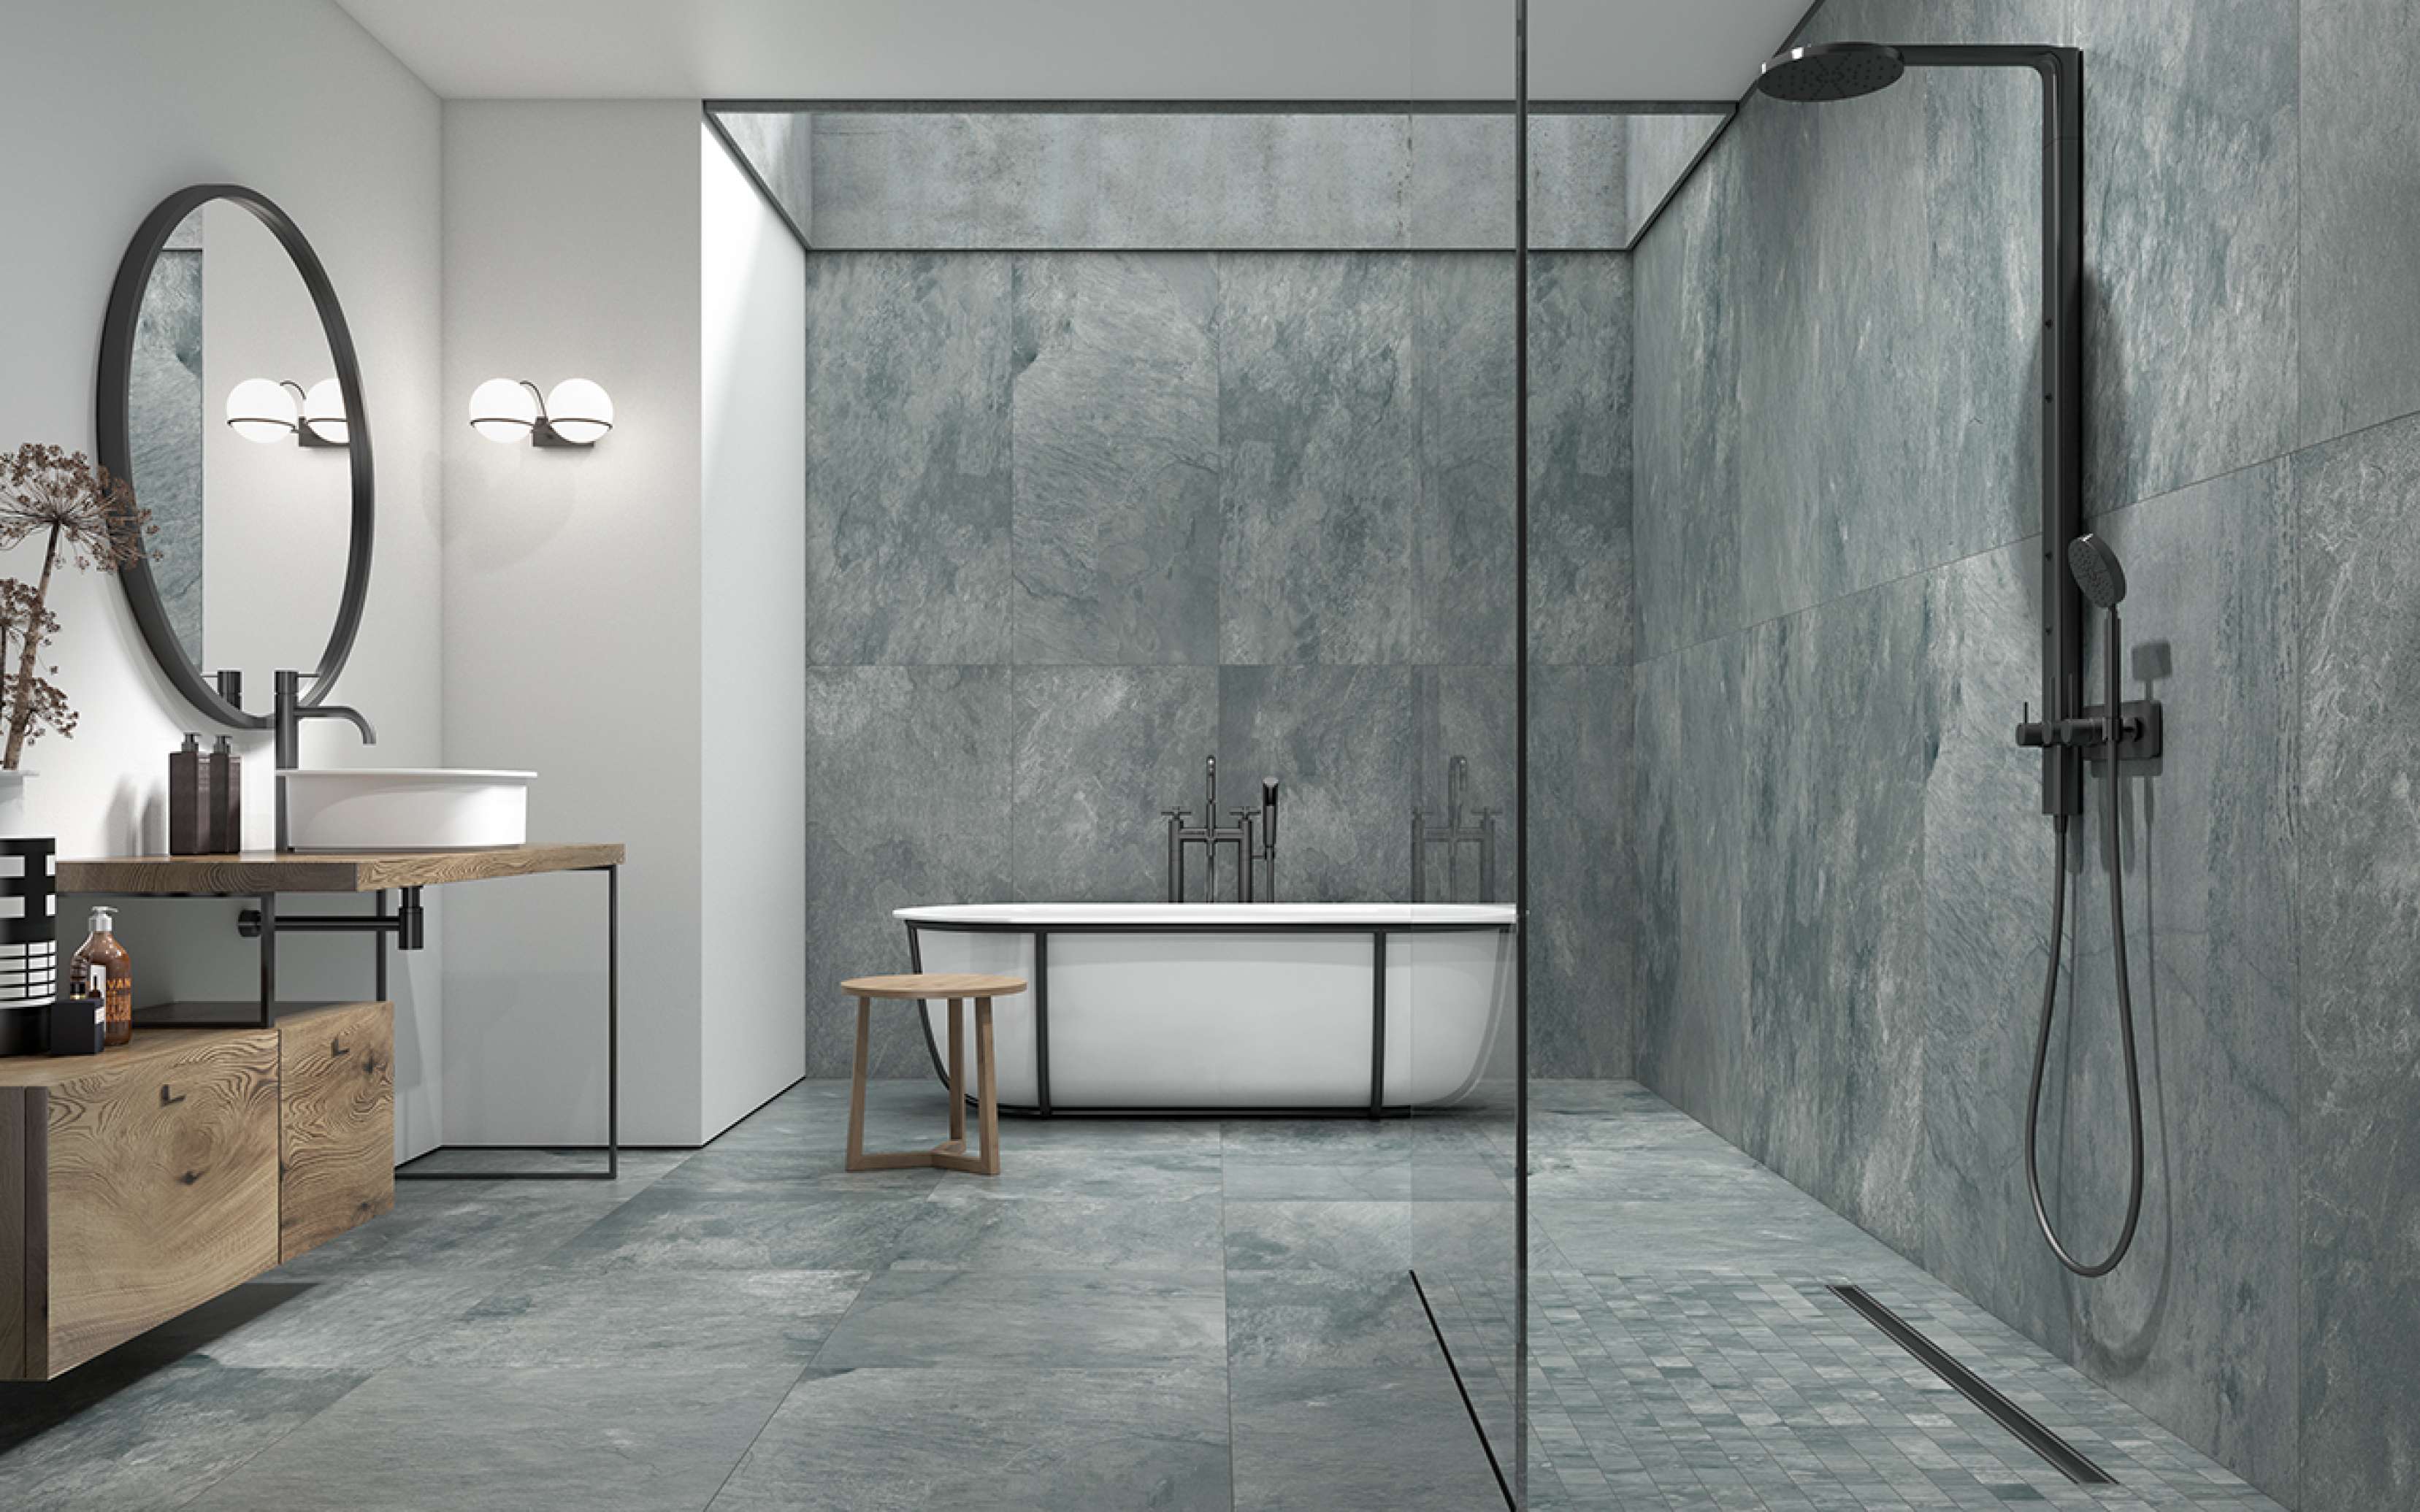 The SLATE stone's unmistakable ceramic reproduction, which has fascinated us for millennia due to its eccentricity, stands out from many others: striking, irreverent and elegant.